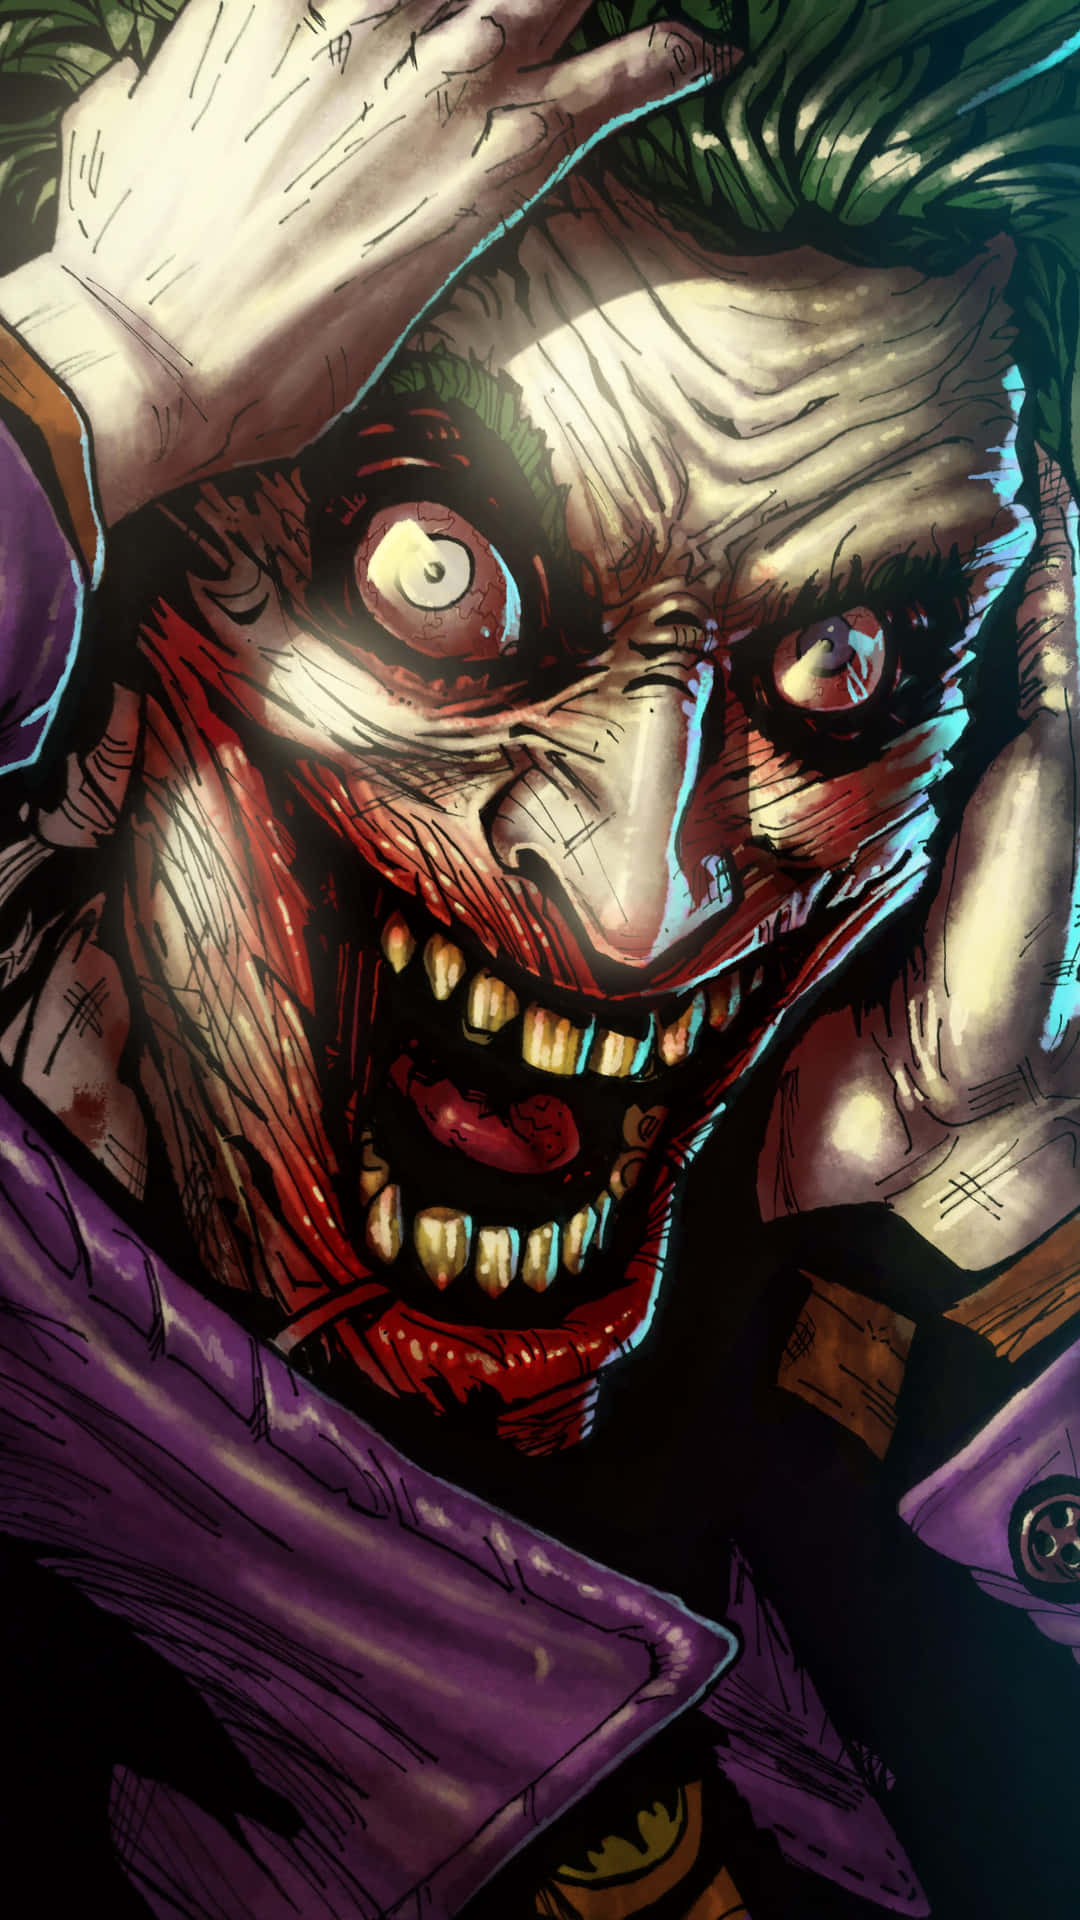 Maniacal Joker Laughing in Vibrant Colors Wallpaper